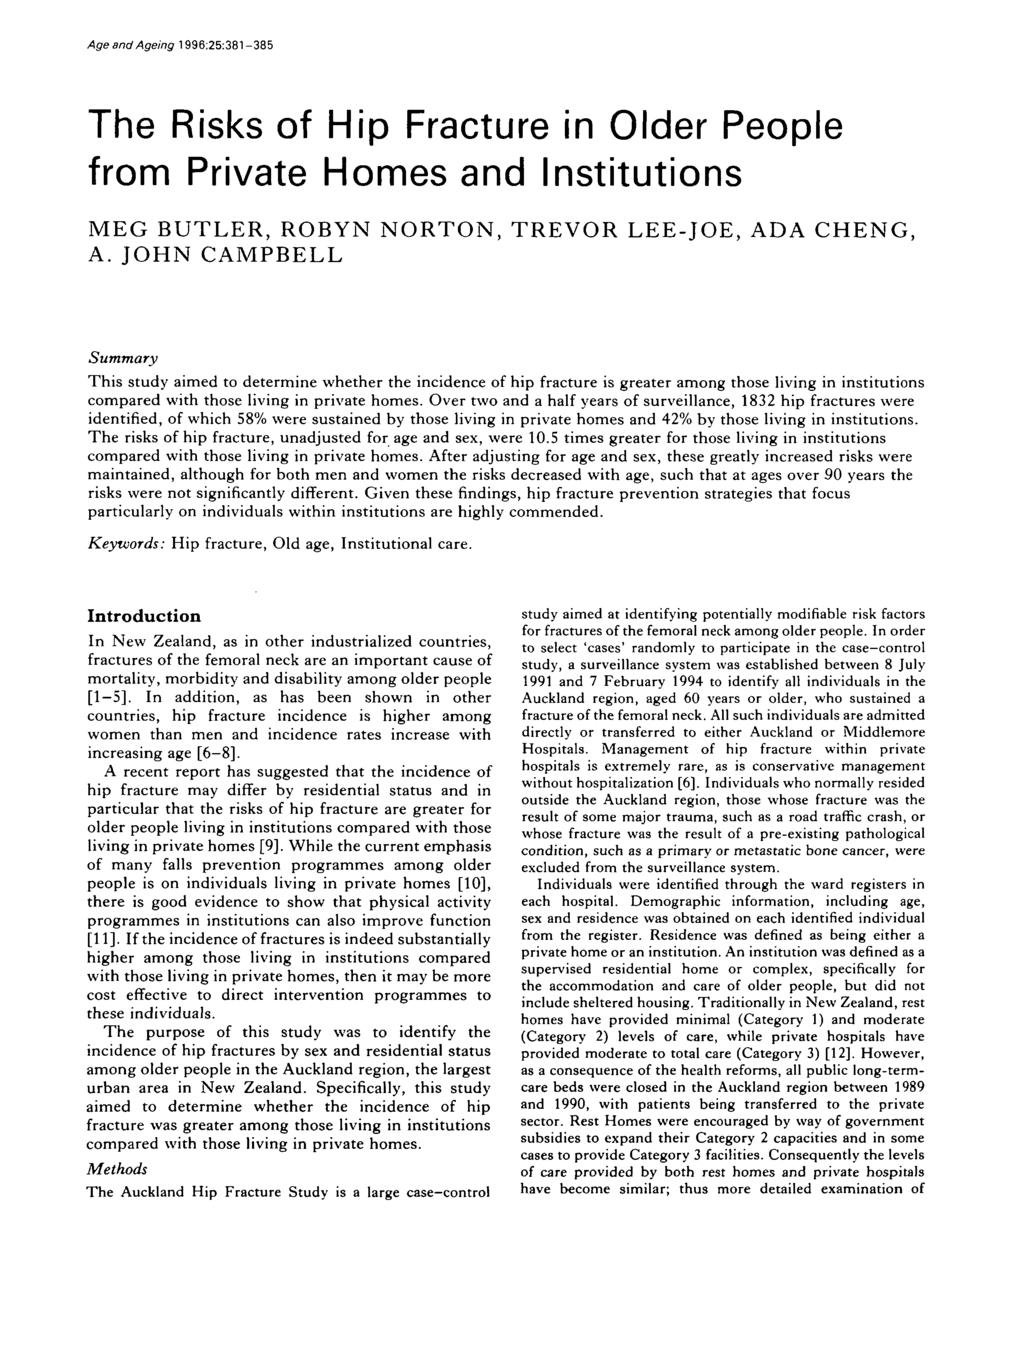 Age and Ageing 1996:25:381-385 The Risks of Hip Fracture in Older People from Private Homes and Institutions MEG BUTLER, ROBYN NORTON, TREVOR LEE-JOE, ADA CHENG, A.